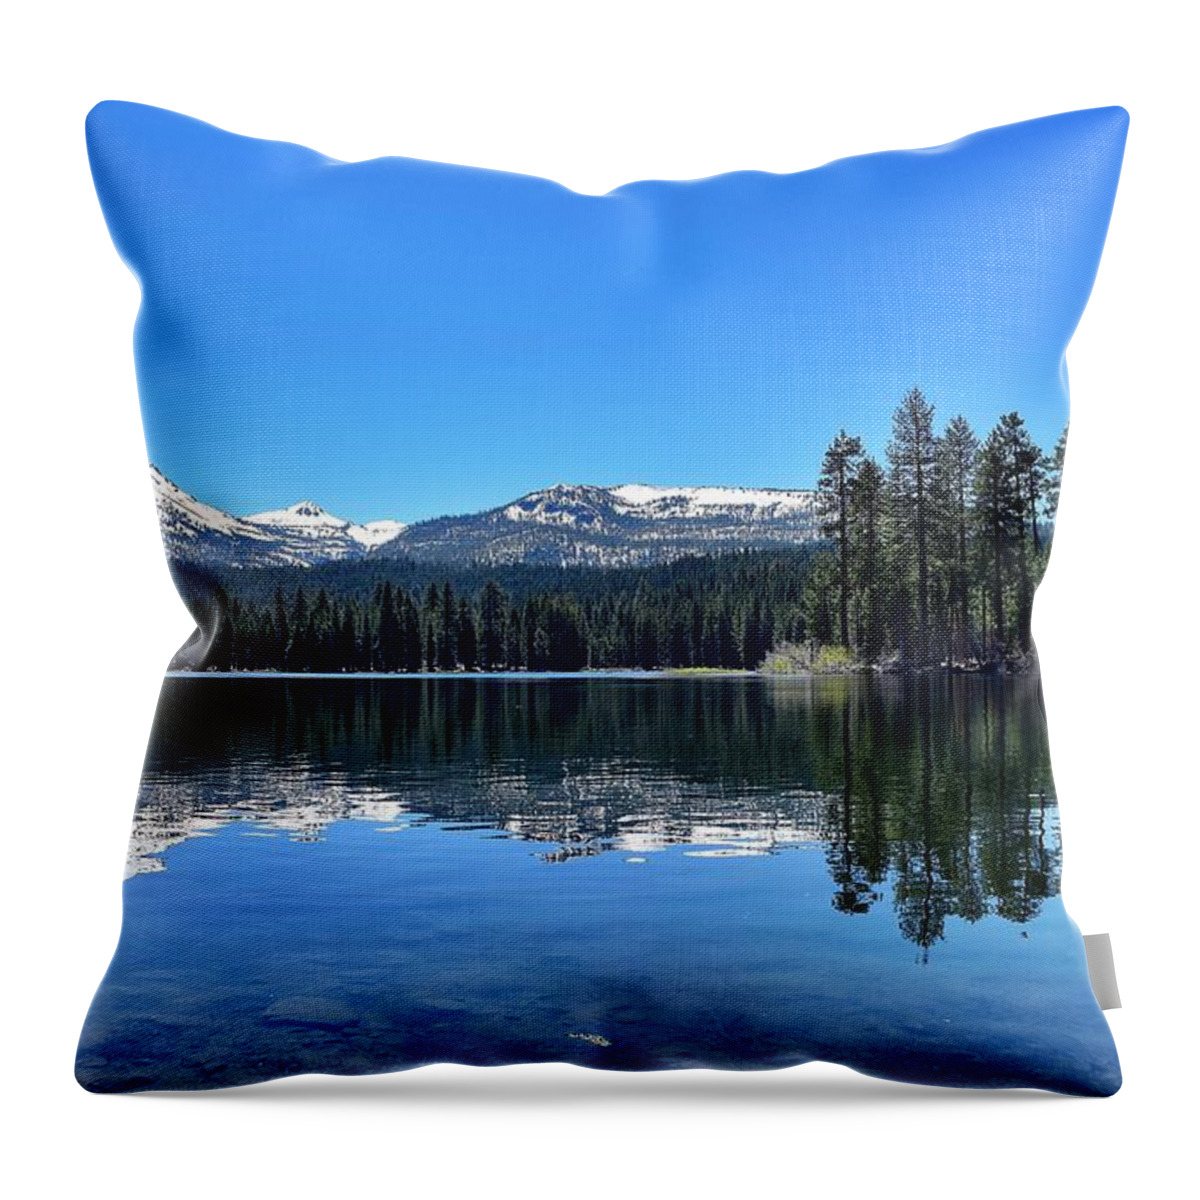 Lassen Volcanic National Park Throw Pillow featuring the photograph Lassen Volcanic National Park by Maria Jansson